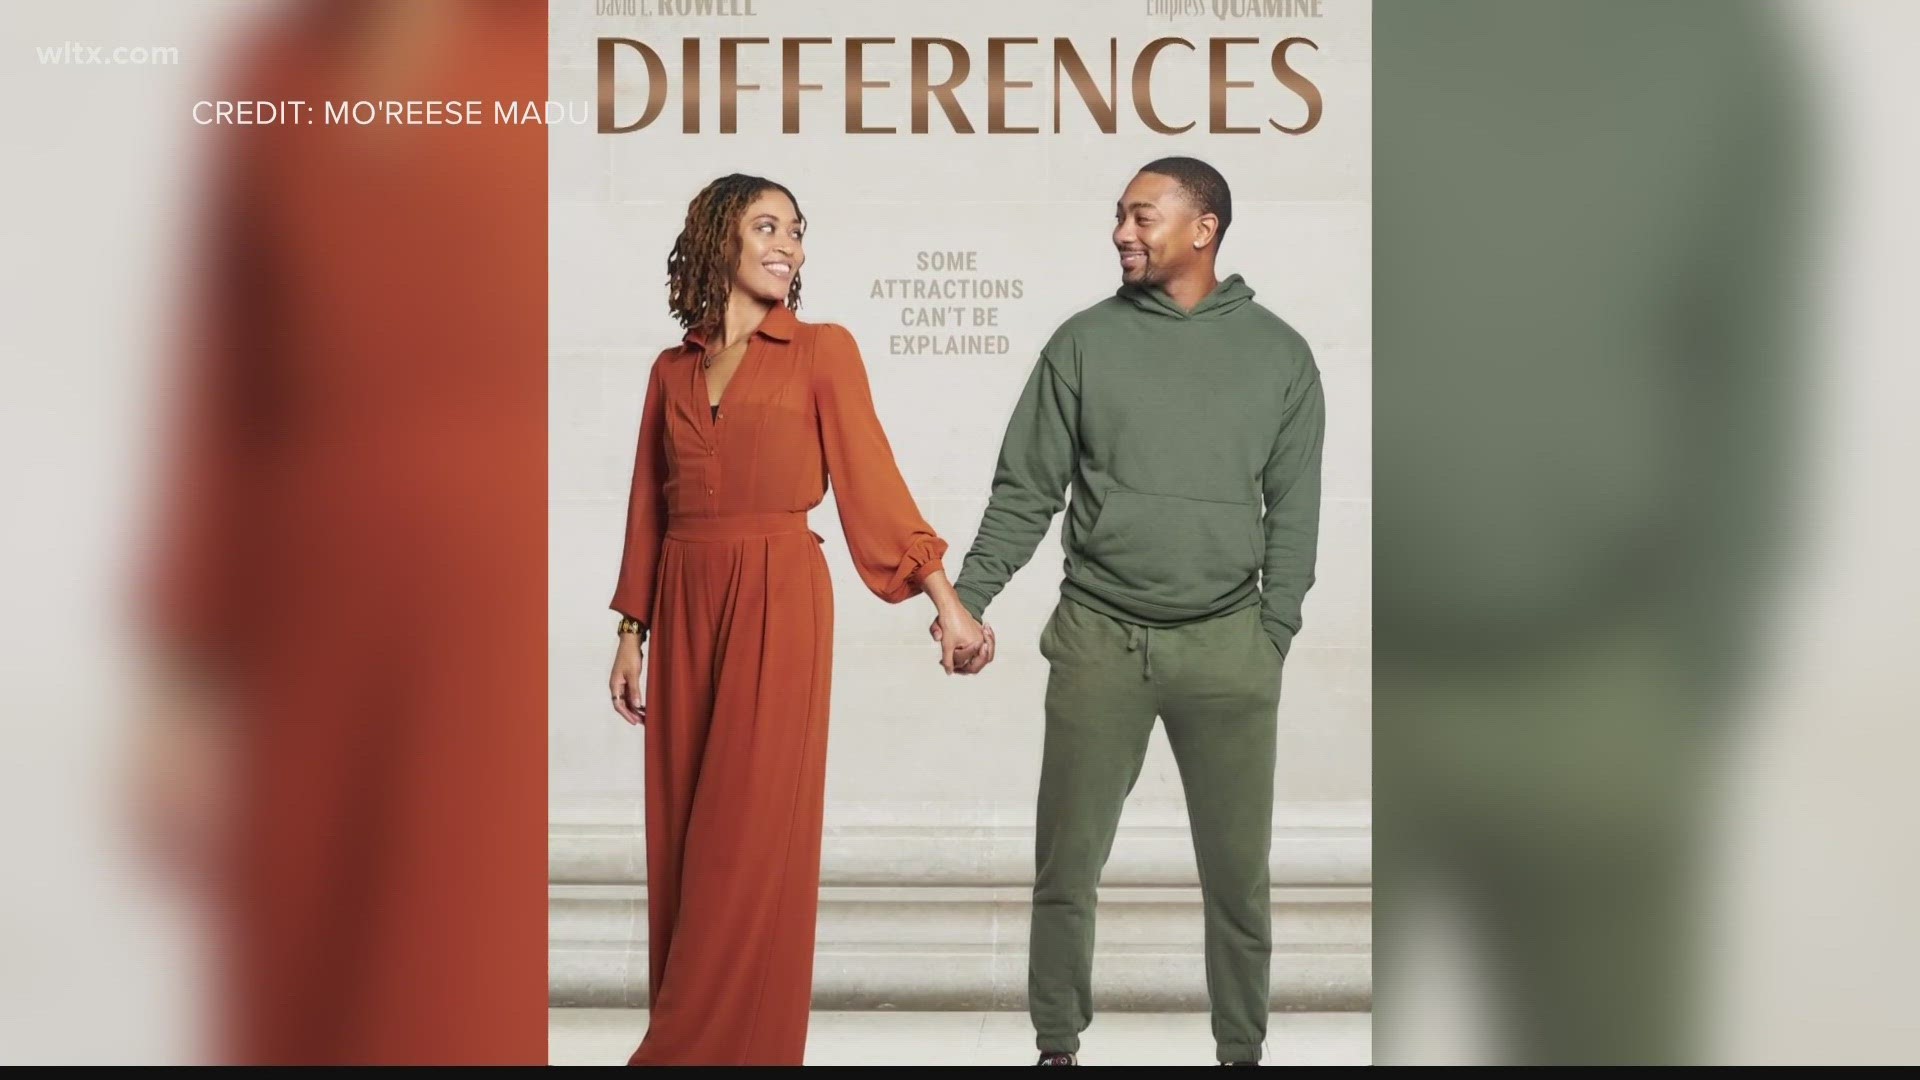 Mo'Reese Madu is a local filmmaker who wrote and produced a Black love story called "Differences" featuring local actors and sites.